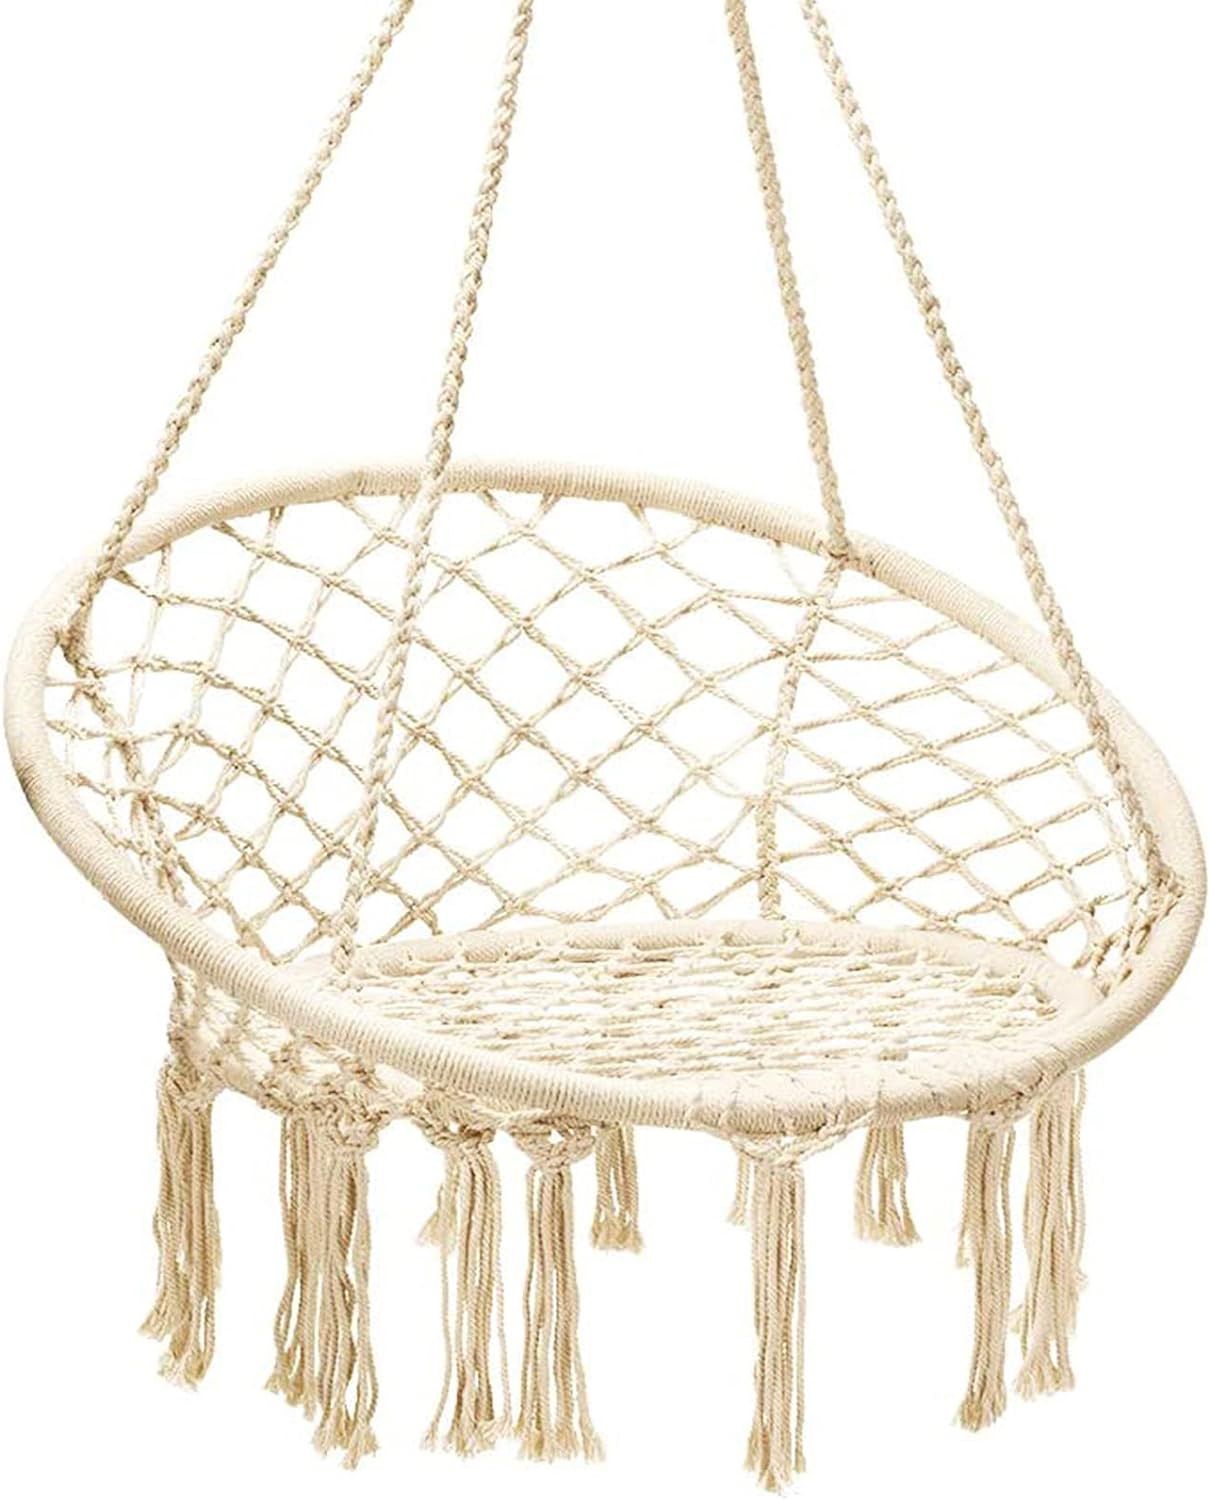 Hanging Hammock Chair, Macrame Hanging Chair 330 Pounds Capacity, Cotton Rope Handwoven Tassels Porch Swing Chair for Bedroom, Living Room, Yard, Gard